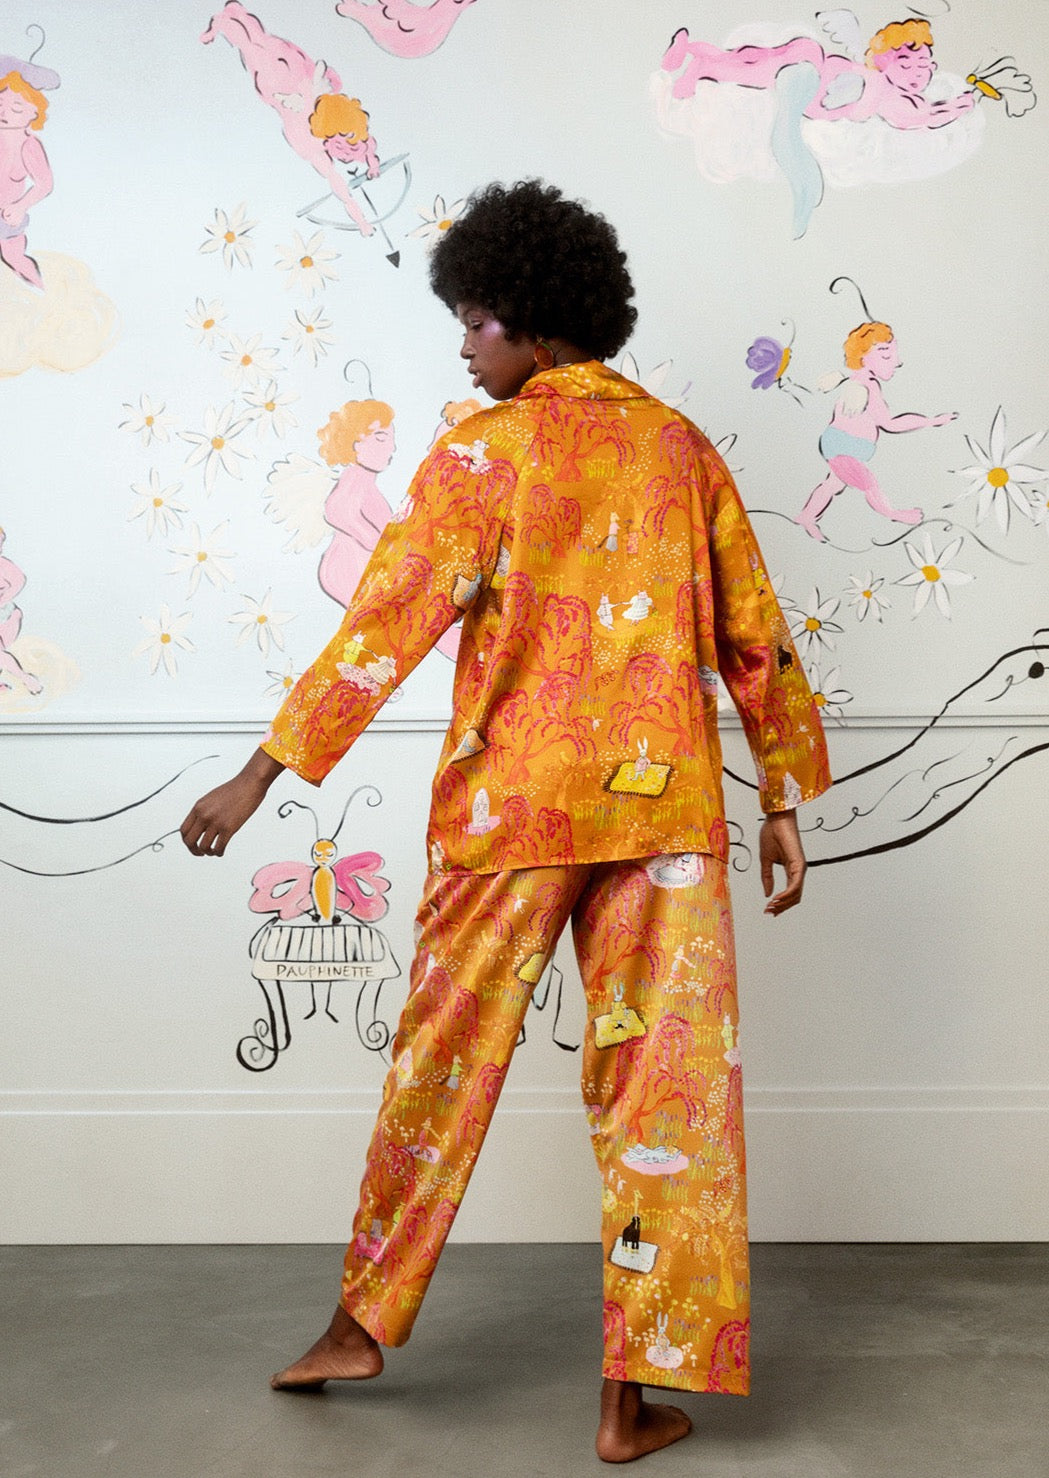 Relax into angelically soft viscose, printed in our SS22 Whiskey Business print. Happily suited animals relax, dance, and situate amongst frabjously fuchsia willow trees-- a guaranteed mood lift.